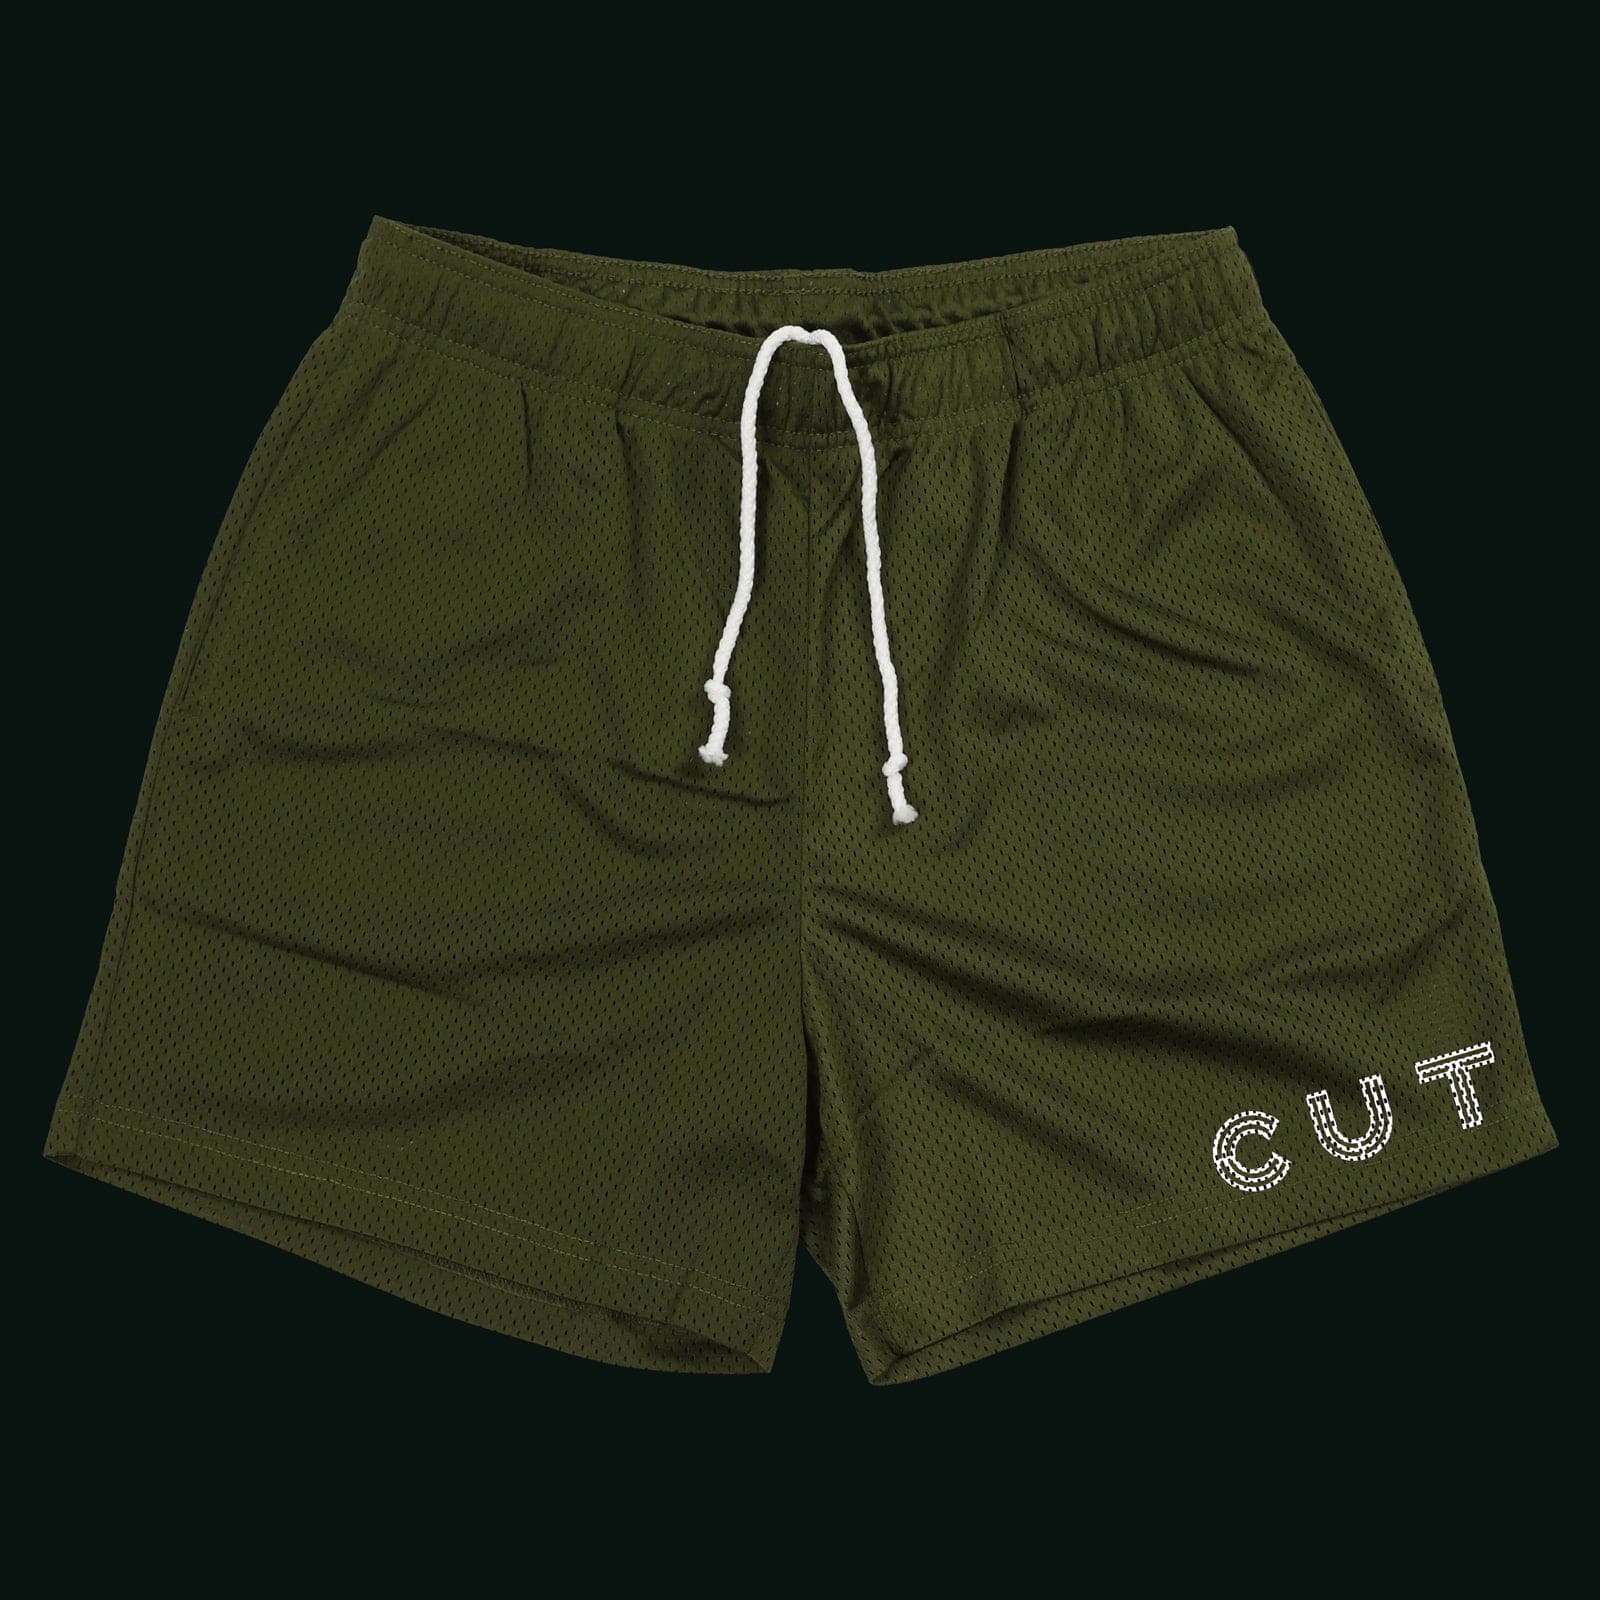 CUT Mesh Athletic Shorts | Black or Olive Green